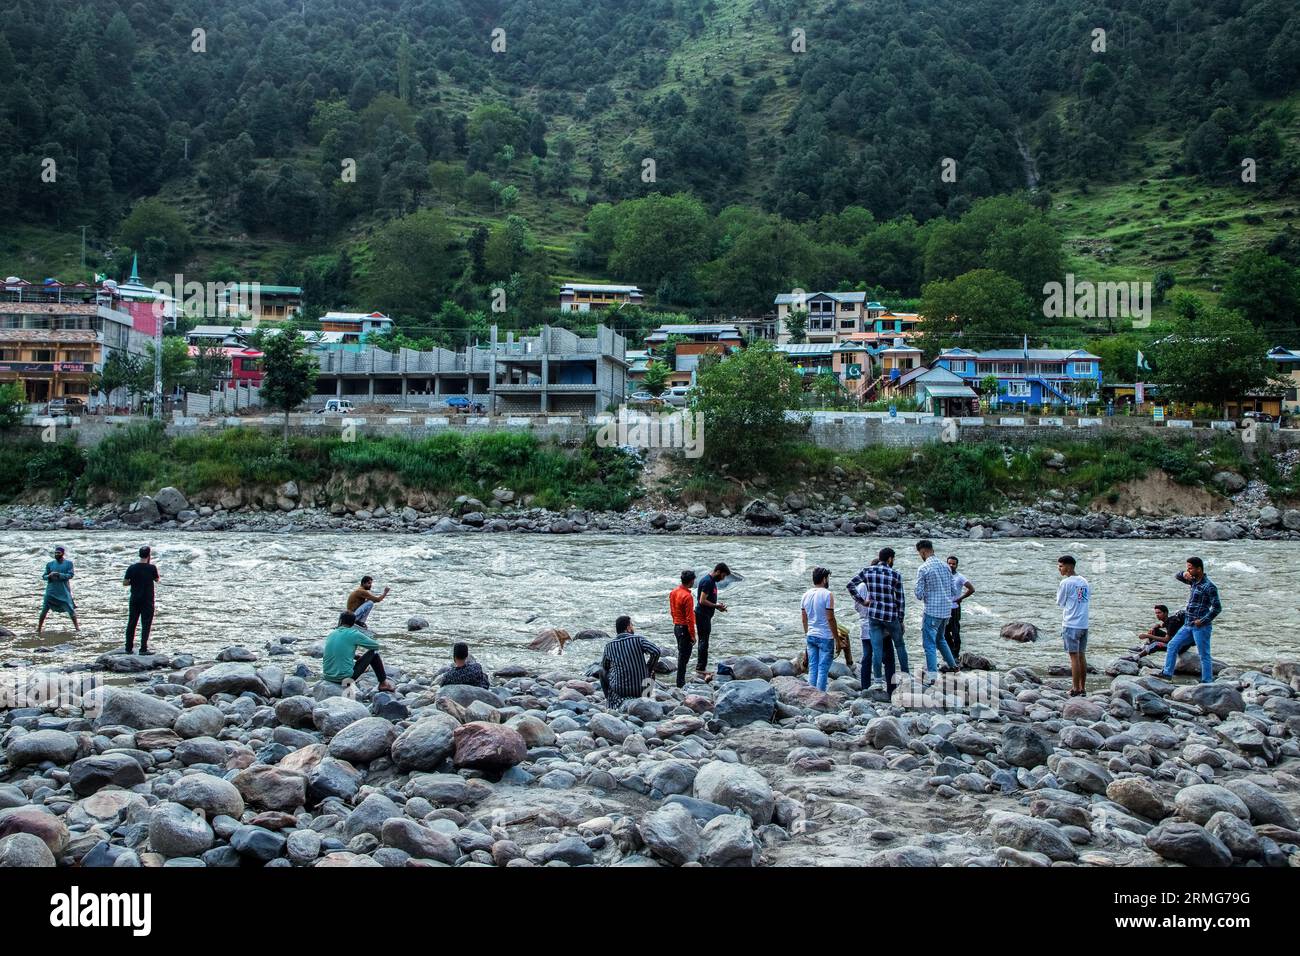 Keran Kupwara, India. 24th Aug, 2023. People are seen enjoying view of Pakistan administered Kashmir on the banks of Neelam river or Kishan Ganga that has divided Kashmir into two parts controlled by nuclear rivals India and Pakistan. The river acts as a disputed line of control and flows through a village called Keran from both sides which is located on the northern side of Indian Kashmir's Border district Kupwara some 150kms from Srinagar and 93kms from Muzaffarabad, in the Pakistan side of Kashmir. (Photo by Faisal Bashir/SOPA Images/Sipa USA) Credit: Sipa USA/Alamy Live News Stock Photo